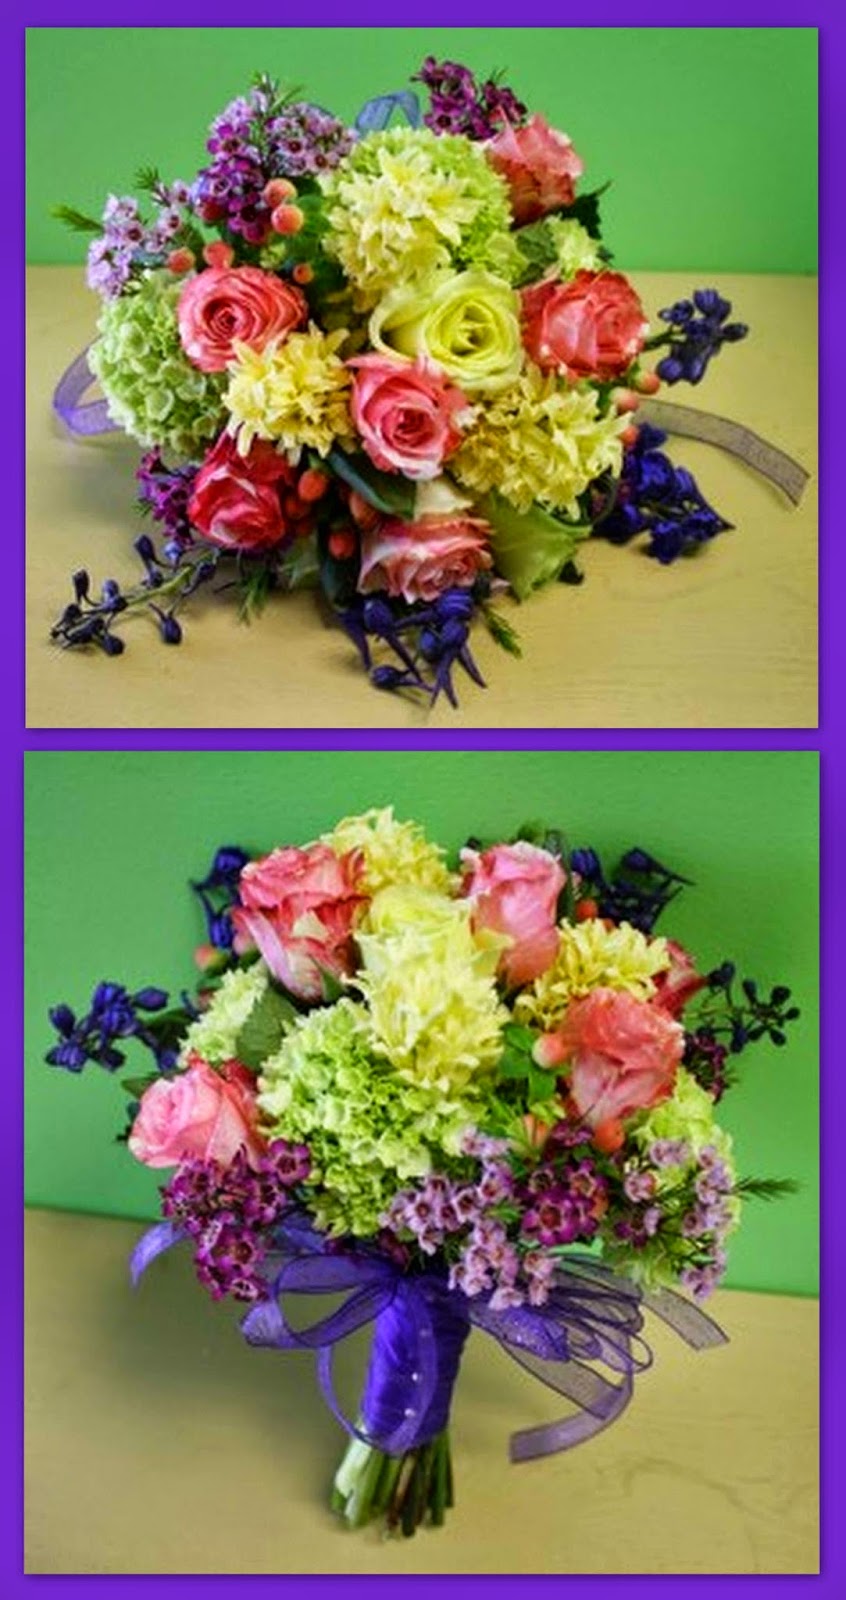 Prom Flowers: MORE Hand Tied Clutch Bouquets from Haverton PA